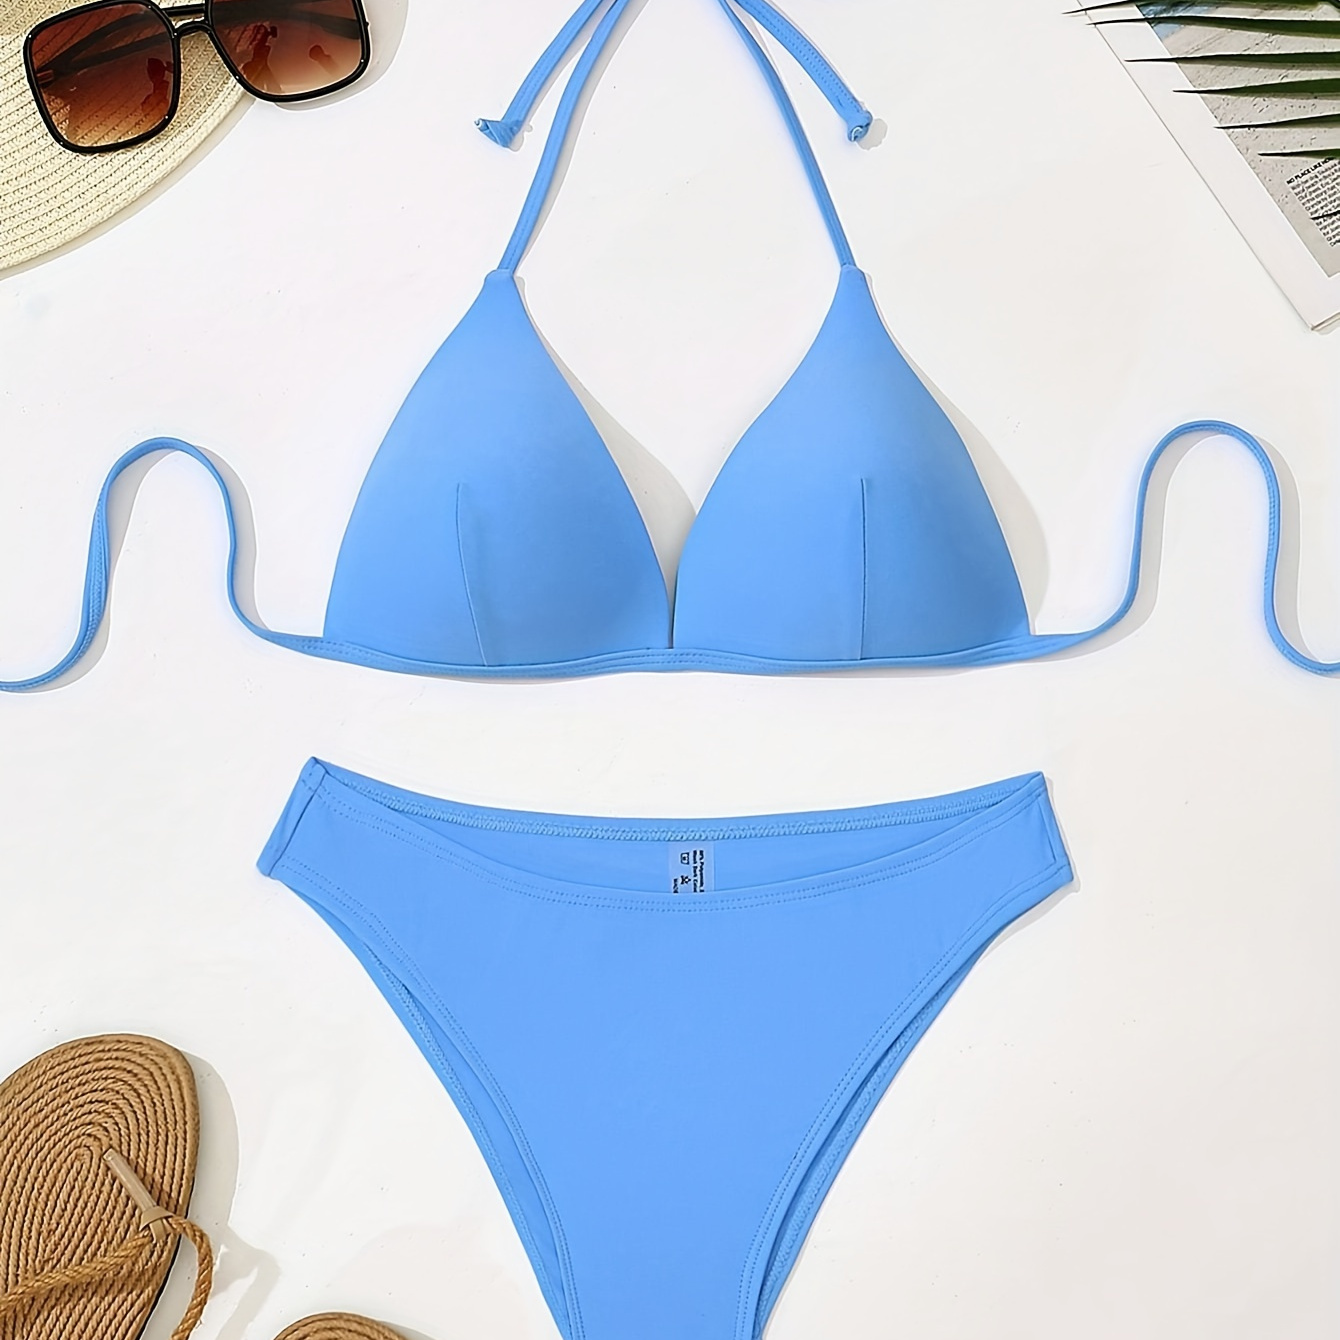 

Women's Two-piece Swimwear Set, Solid Color Light Blue Bikini, Adjustable Triangle Top With Halter Neck Tie, Low-rise Bottoms